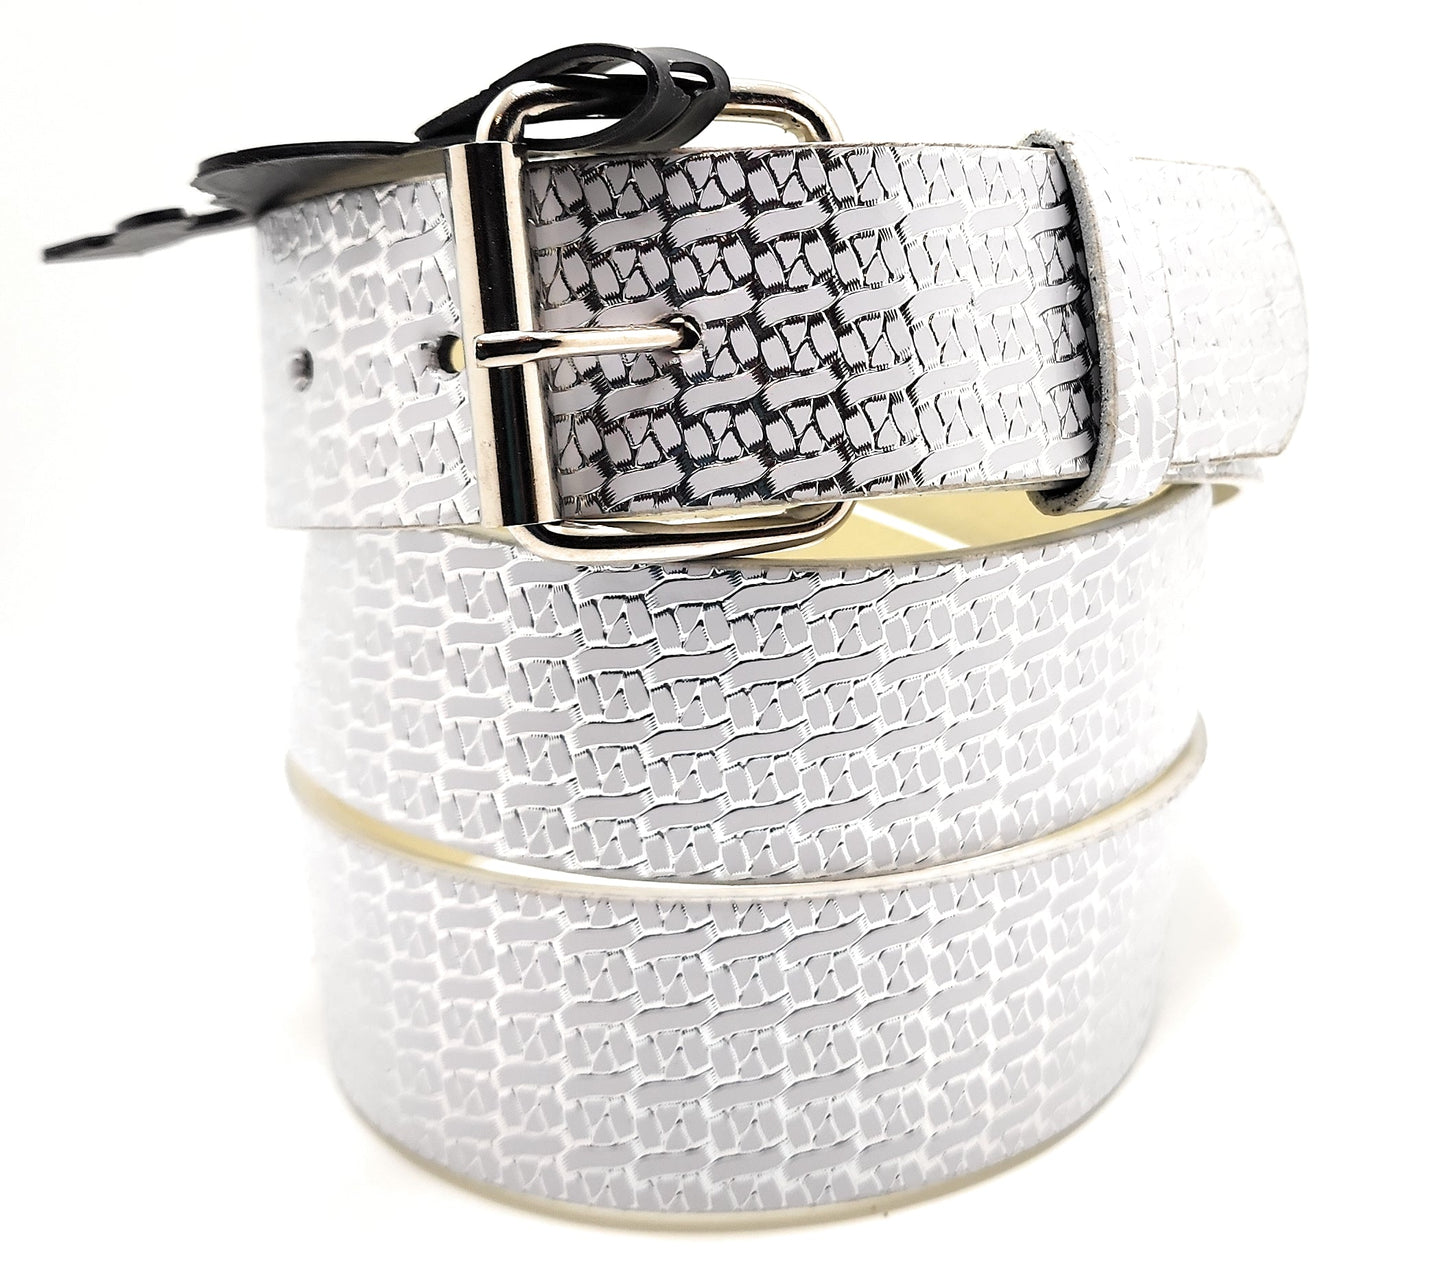 White and Silver Ribbons on White Leather Belt shop.AxeDr.com belt, Genuine Leather, Gift for Him, shiny, white